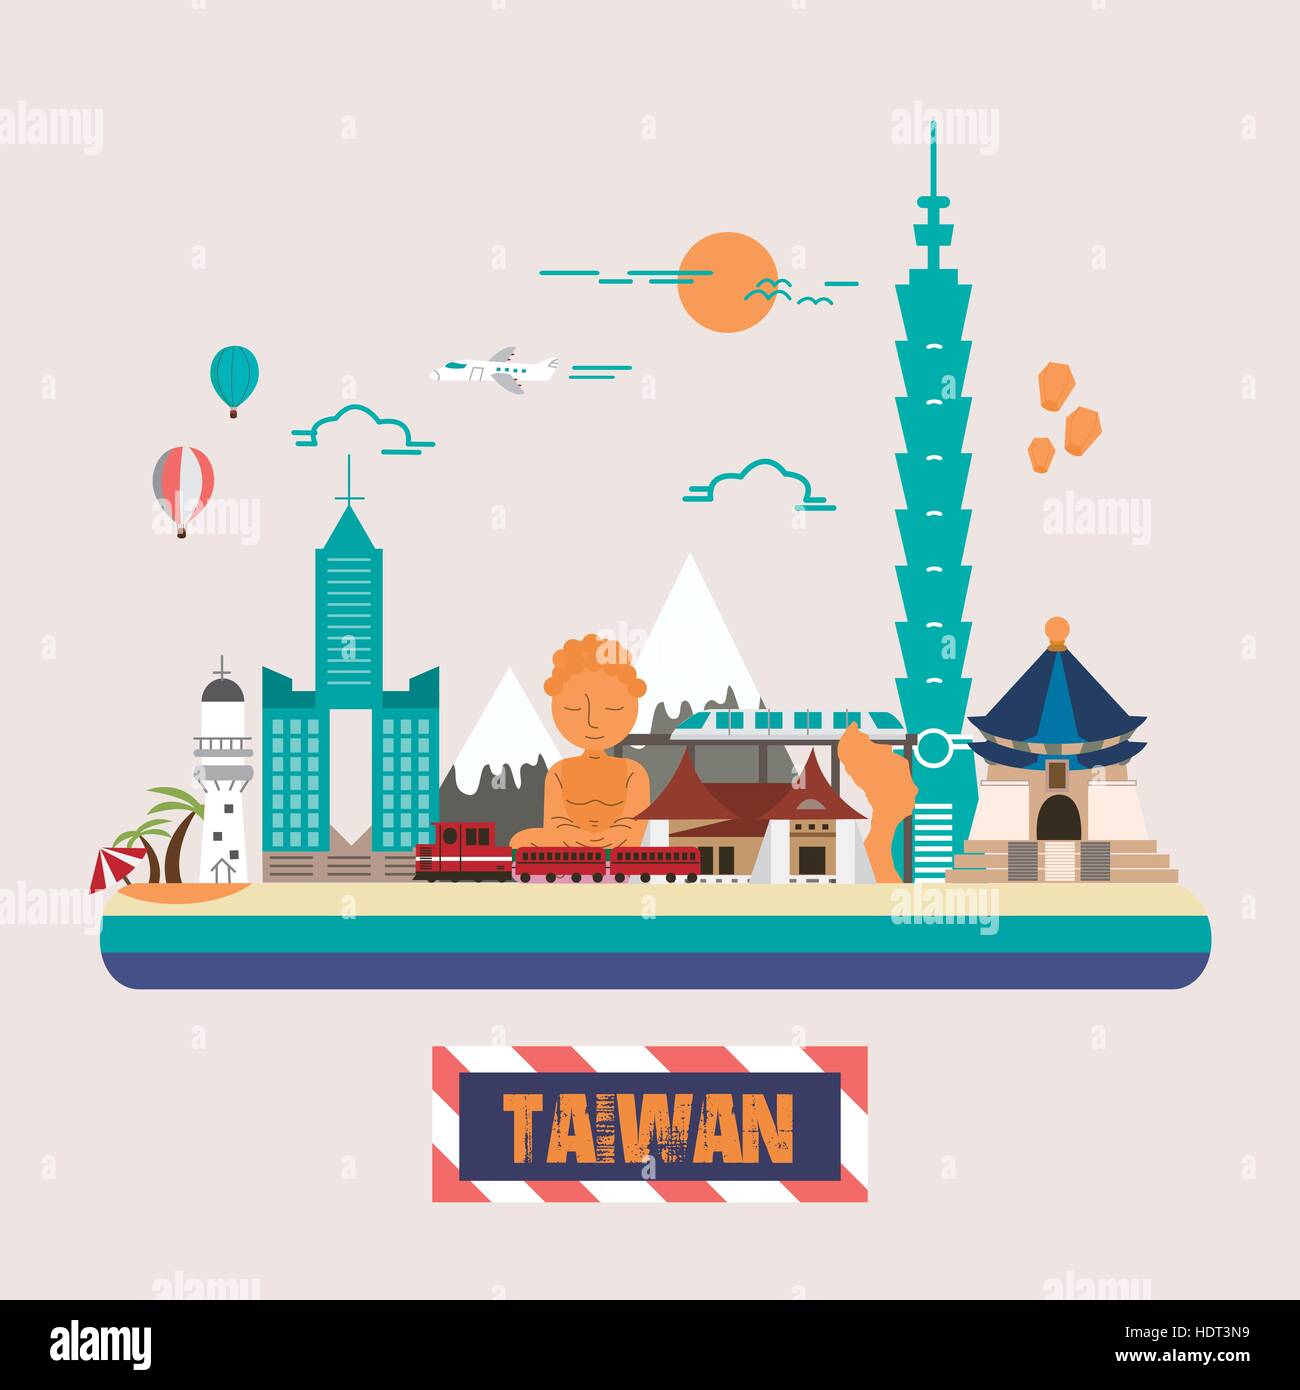 Taiwan attractions collection in flat design style Stock Vector